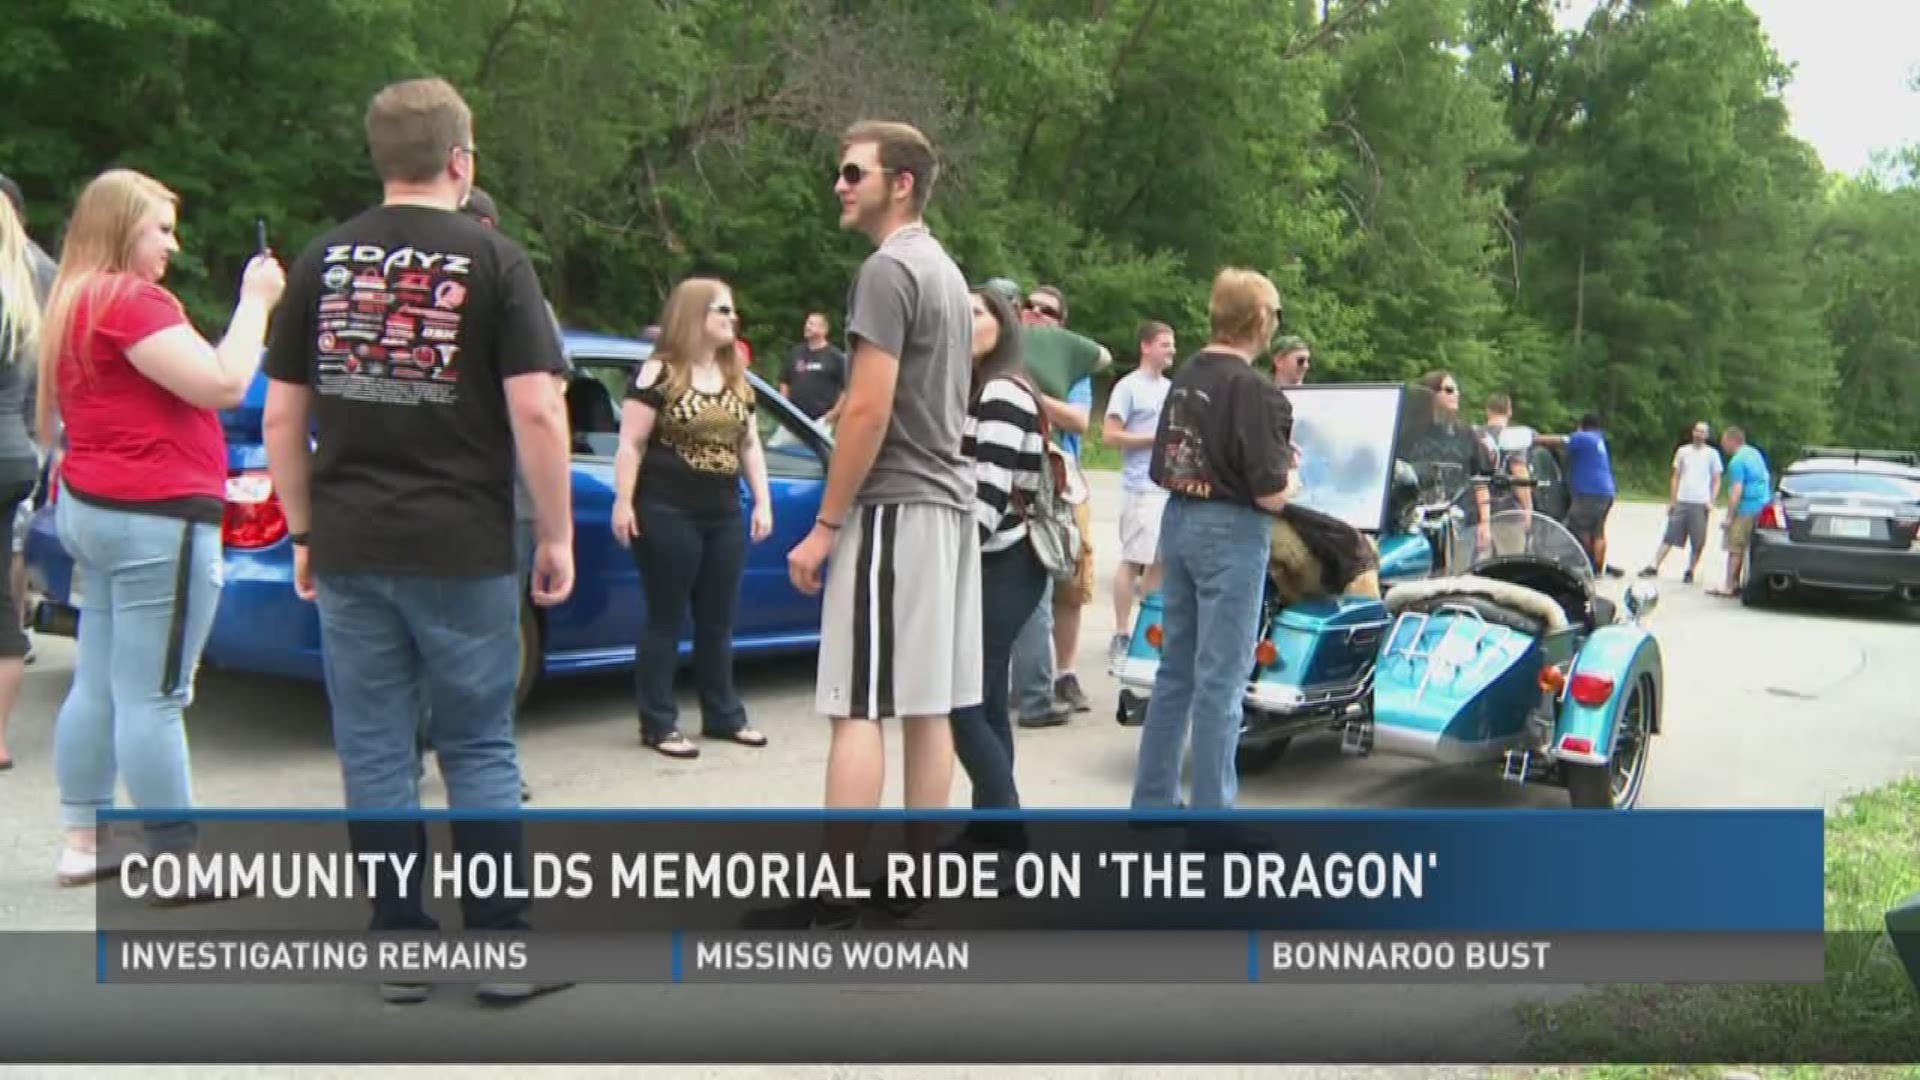 Around 80 drivers rallied on Saturday to remember two men who died in a crash on the stretch of U.S. 129 known as The Dragon.